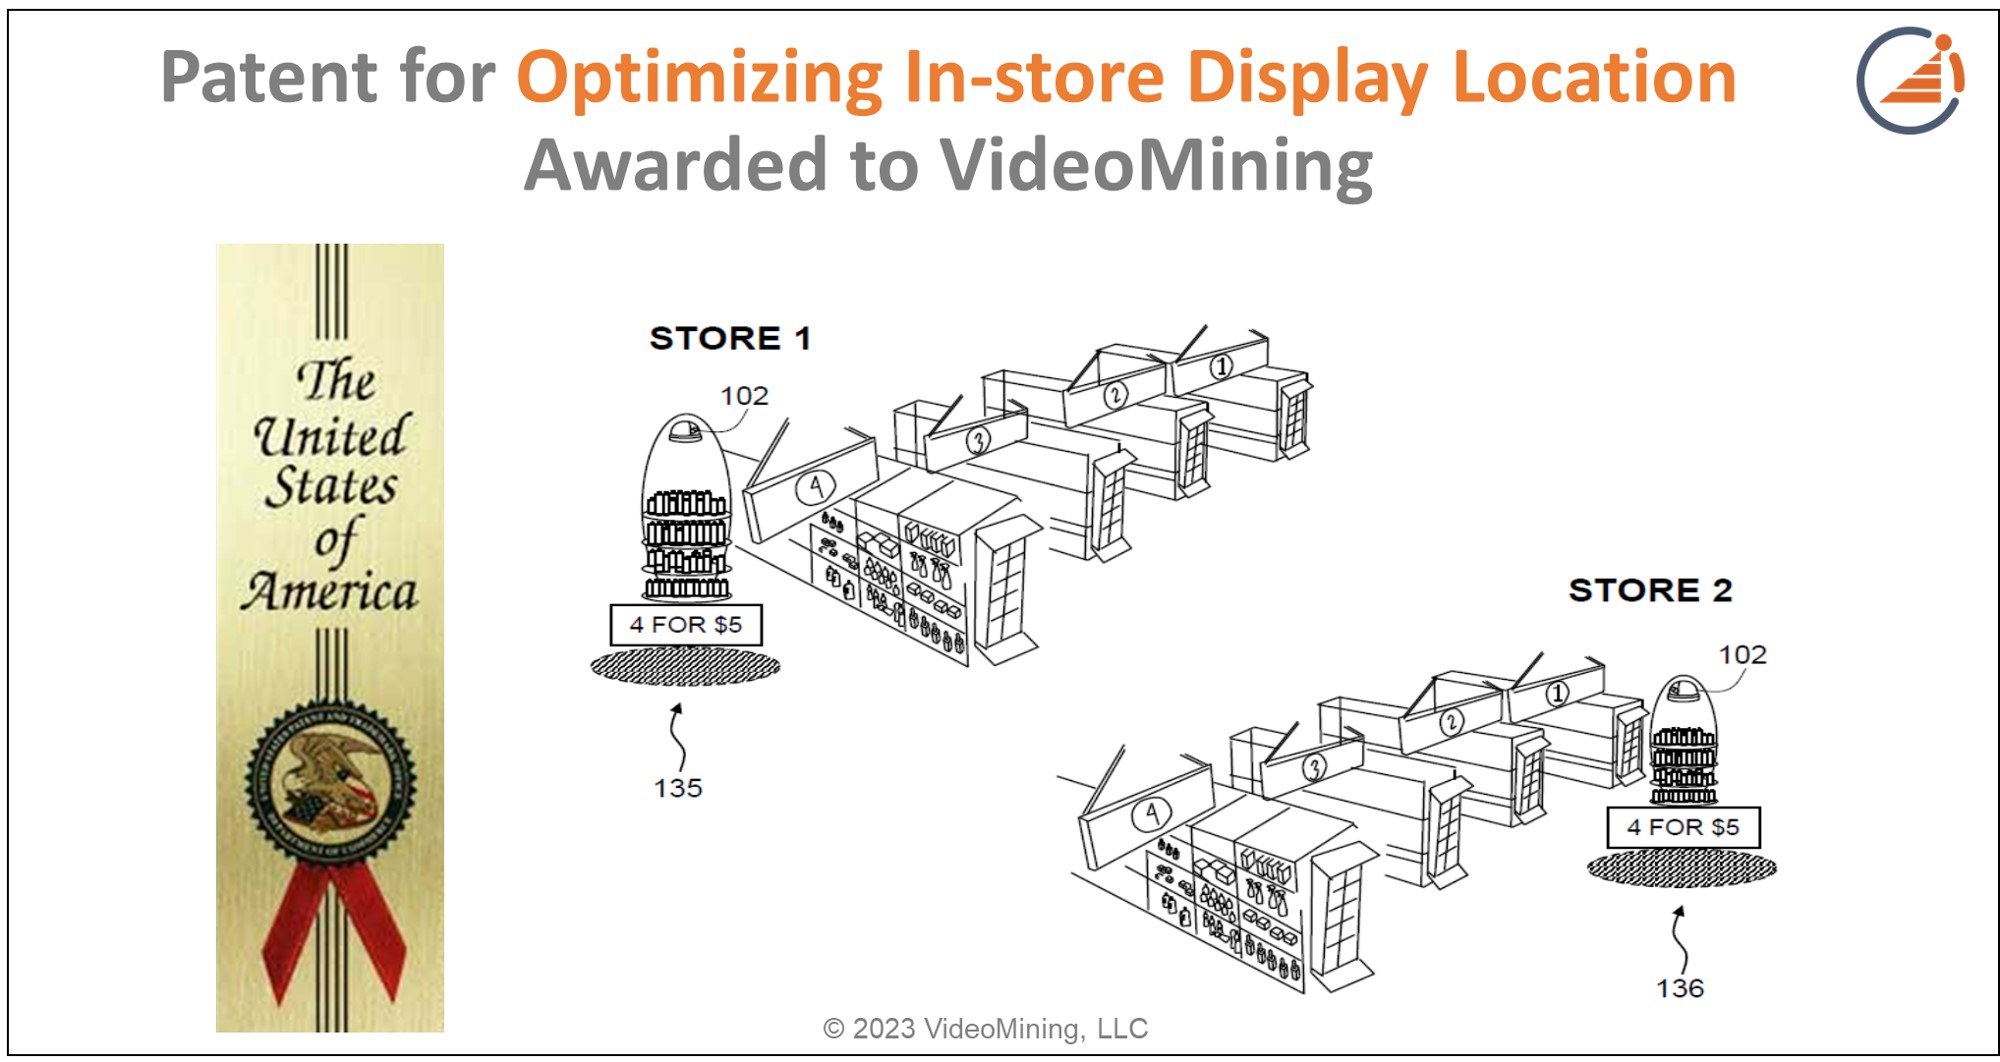 Patent for Optimizing In-Store Display Location Awarded to VideoMining